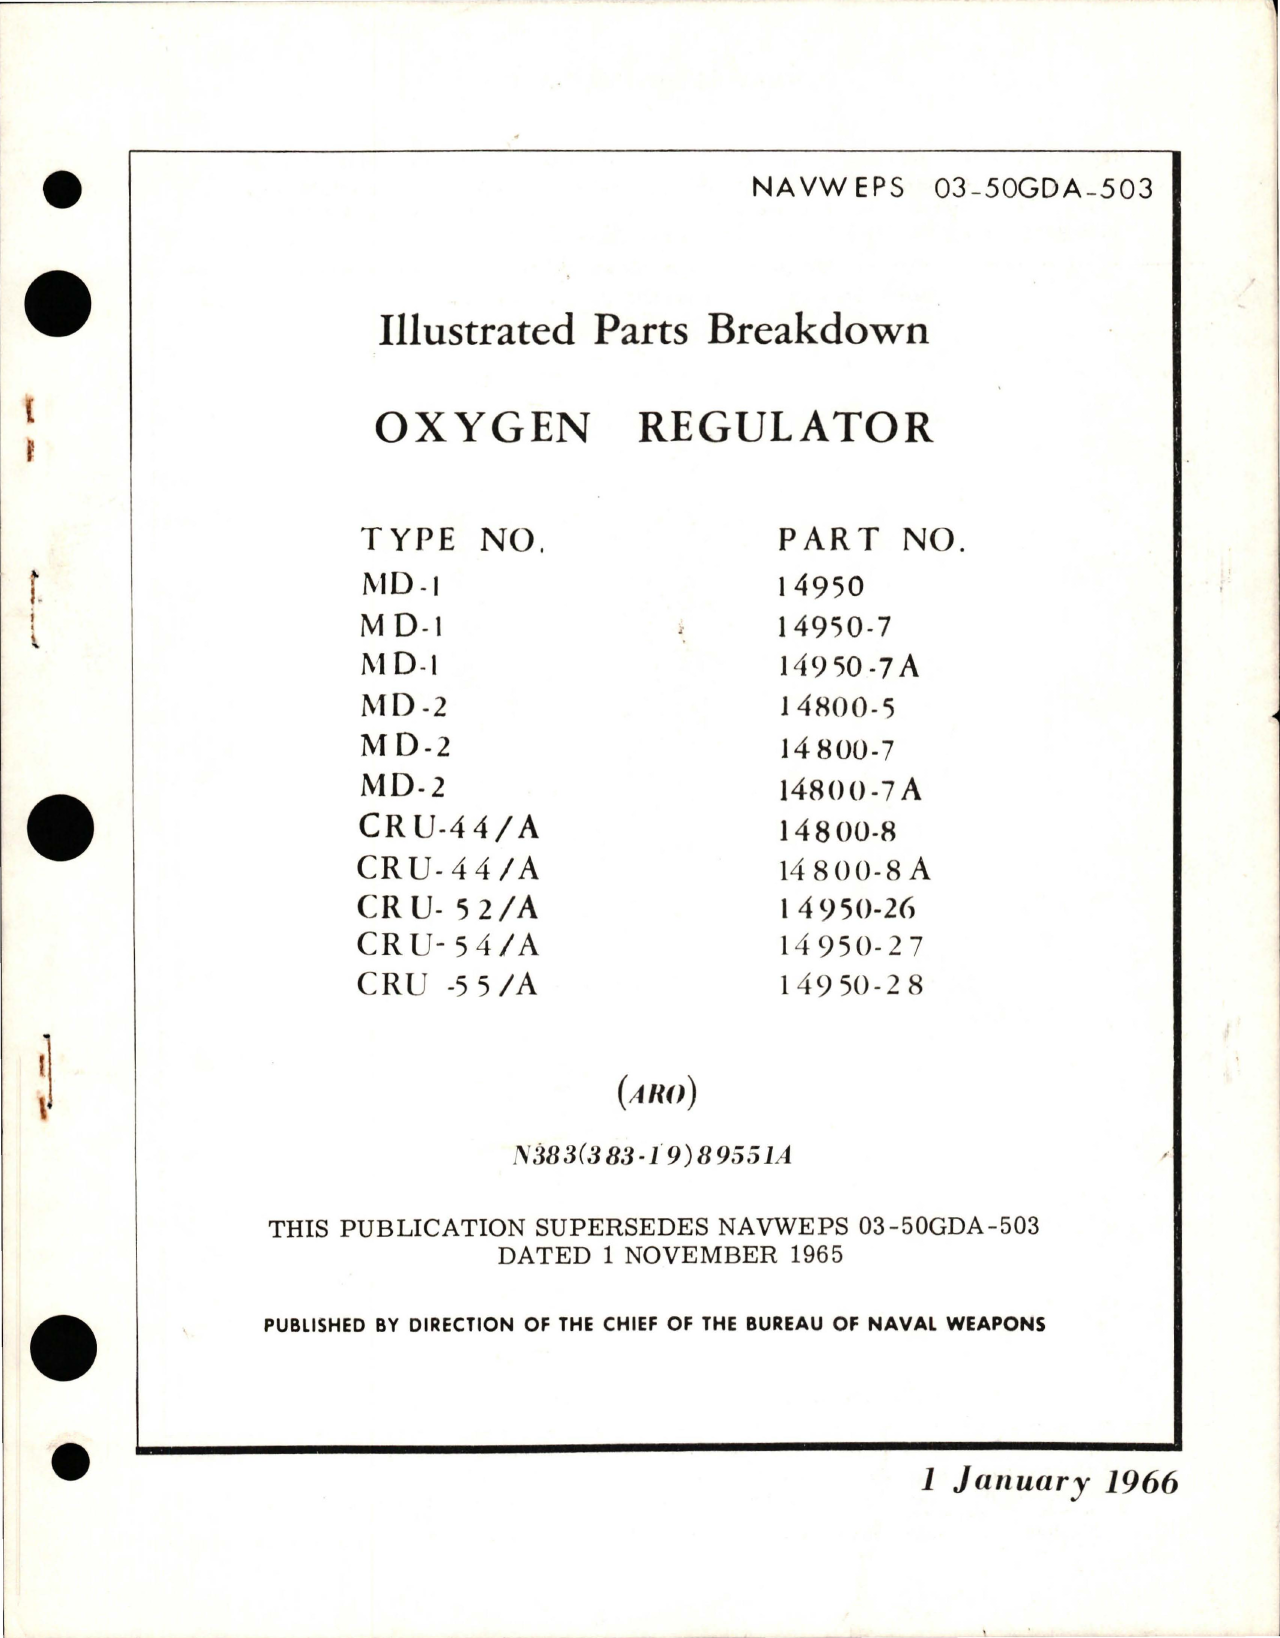 Sample page 1 from AirCorps Library document: Illustrated Parts Breakdown for Oxygen Regulator 